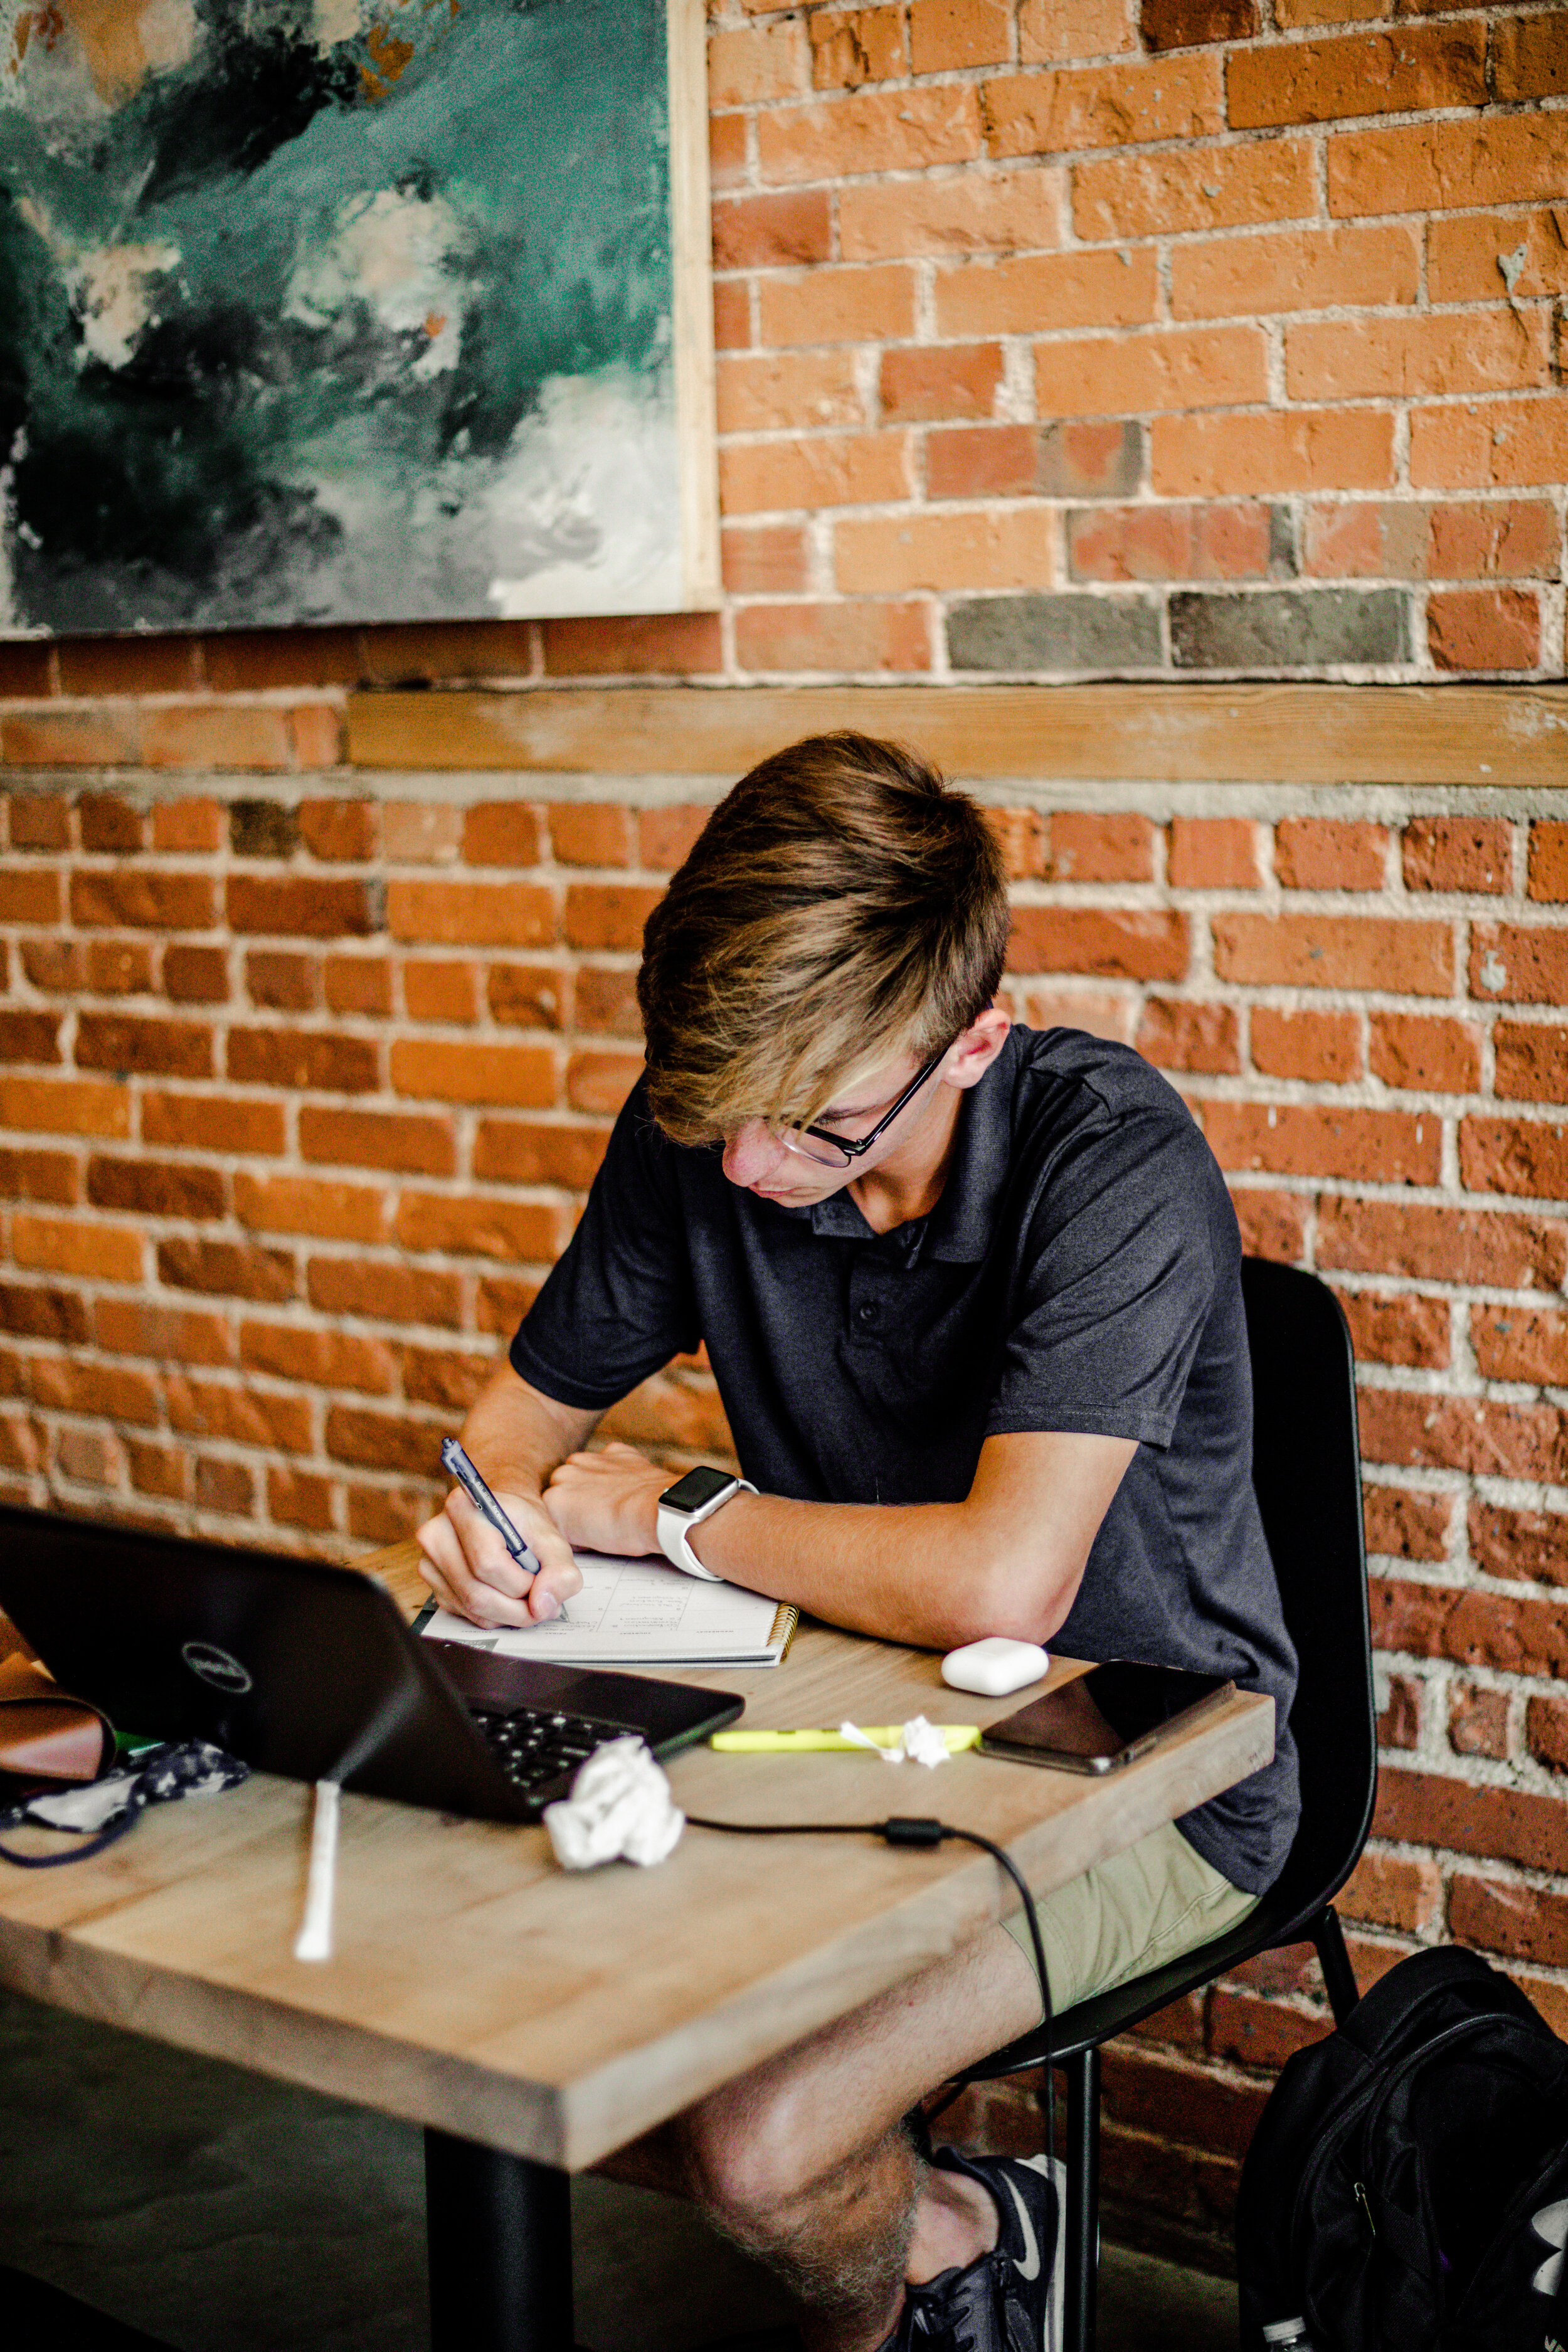 Greer local, Joe Durrell, takes advantage of Barista Alleys calming, coffeeshop atmosphere to catch up on homework.